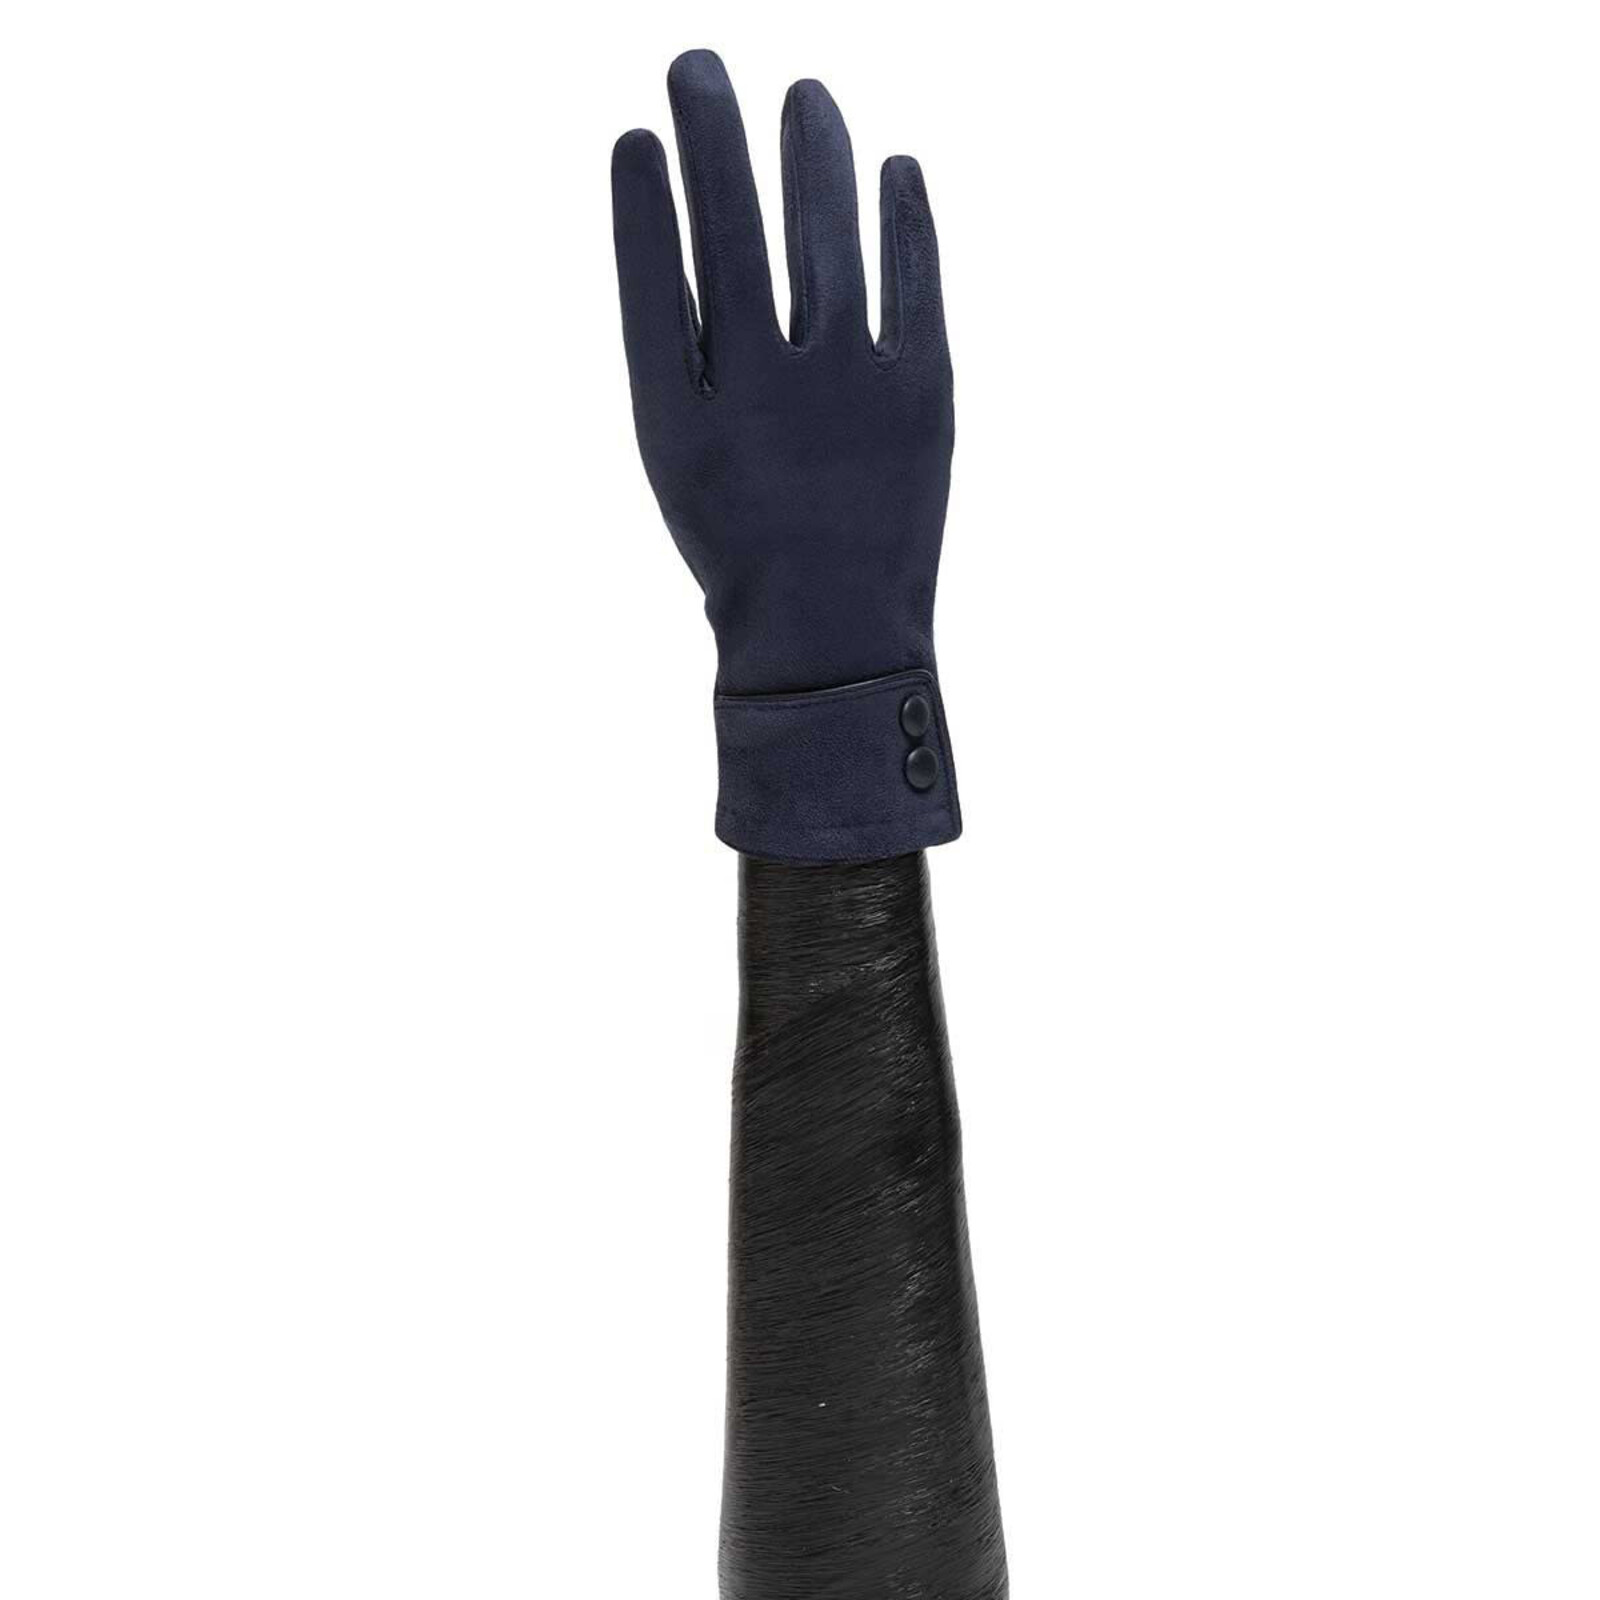 Trezo NAVY GLOVES WITH 2 BUTTON CUFF    X8079 loading=